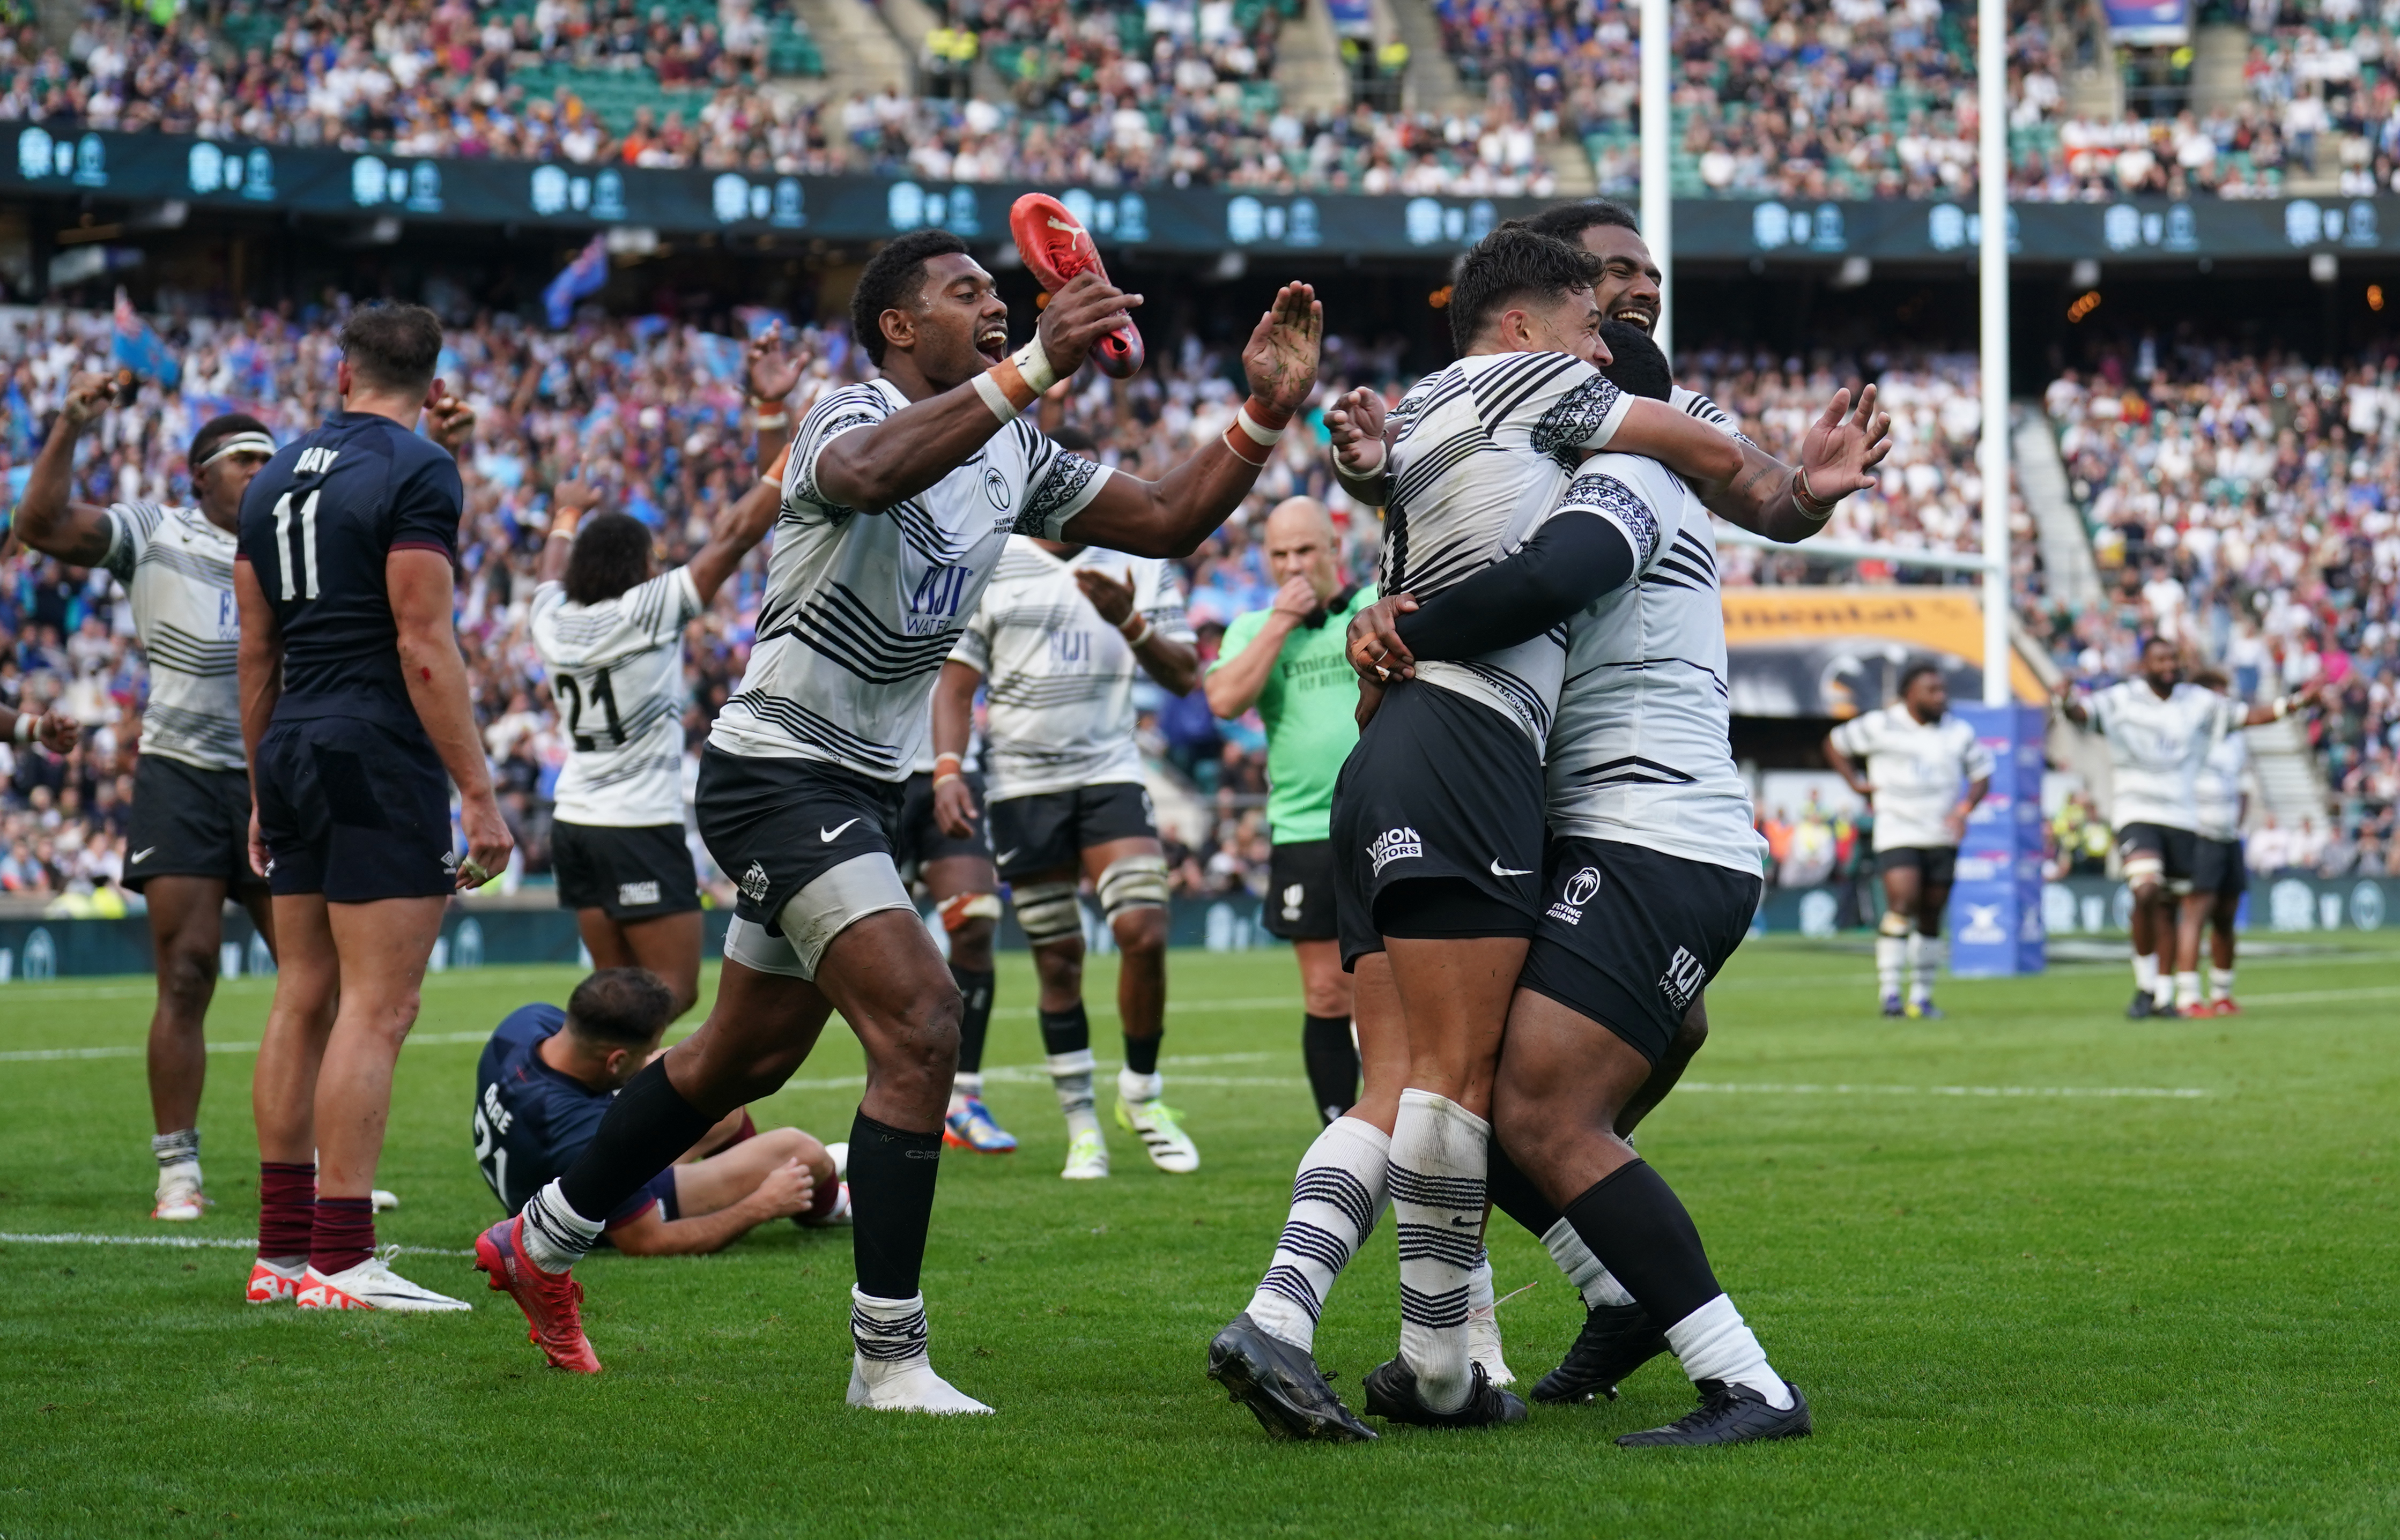 Fiji players celebrate the final whistle after defeating England at Twickenham in August